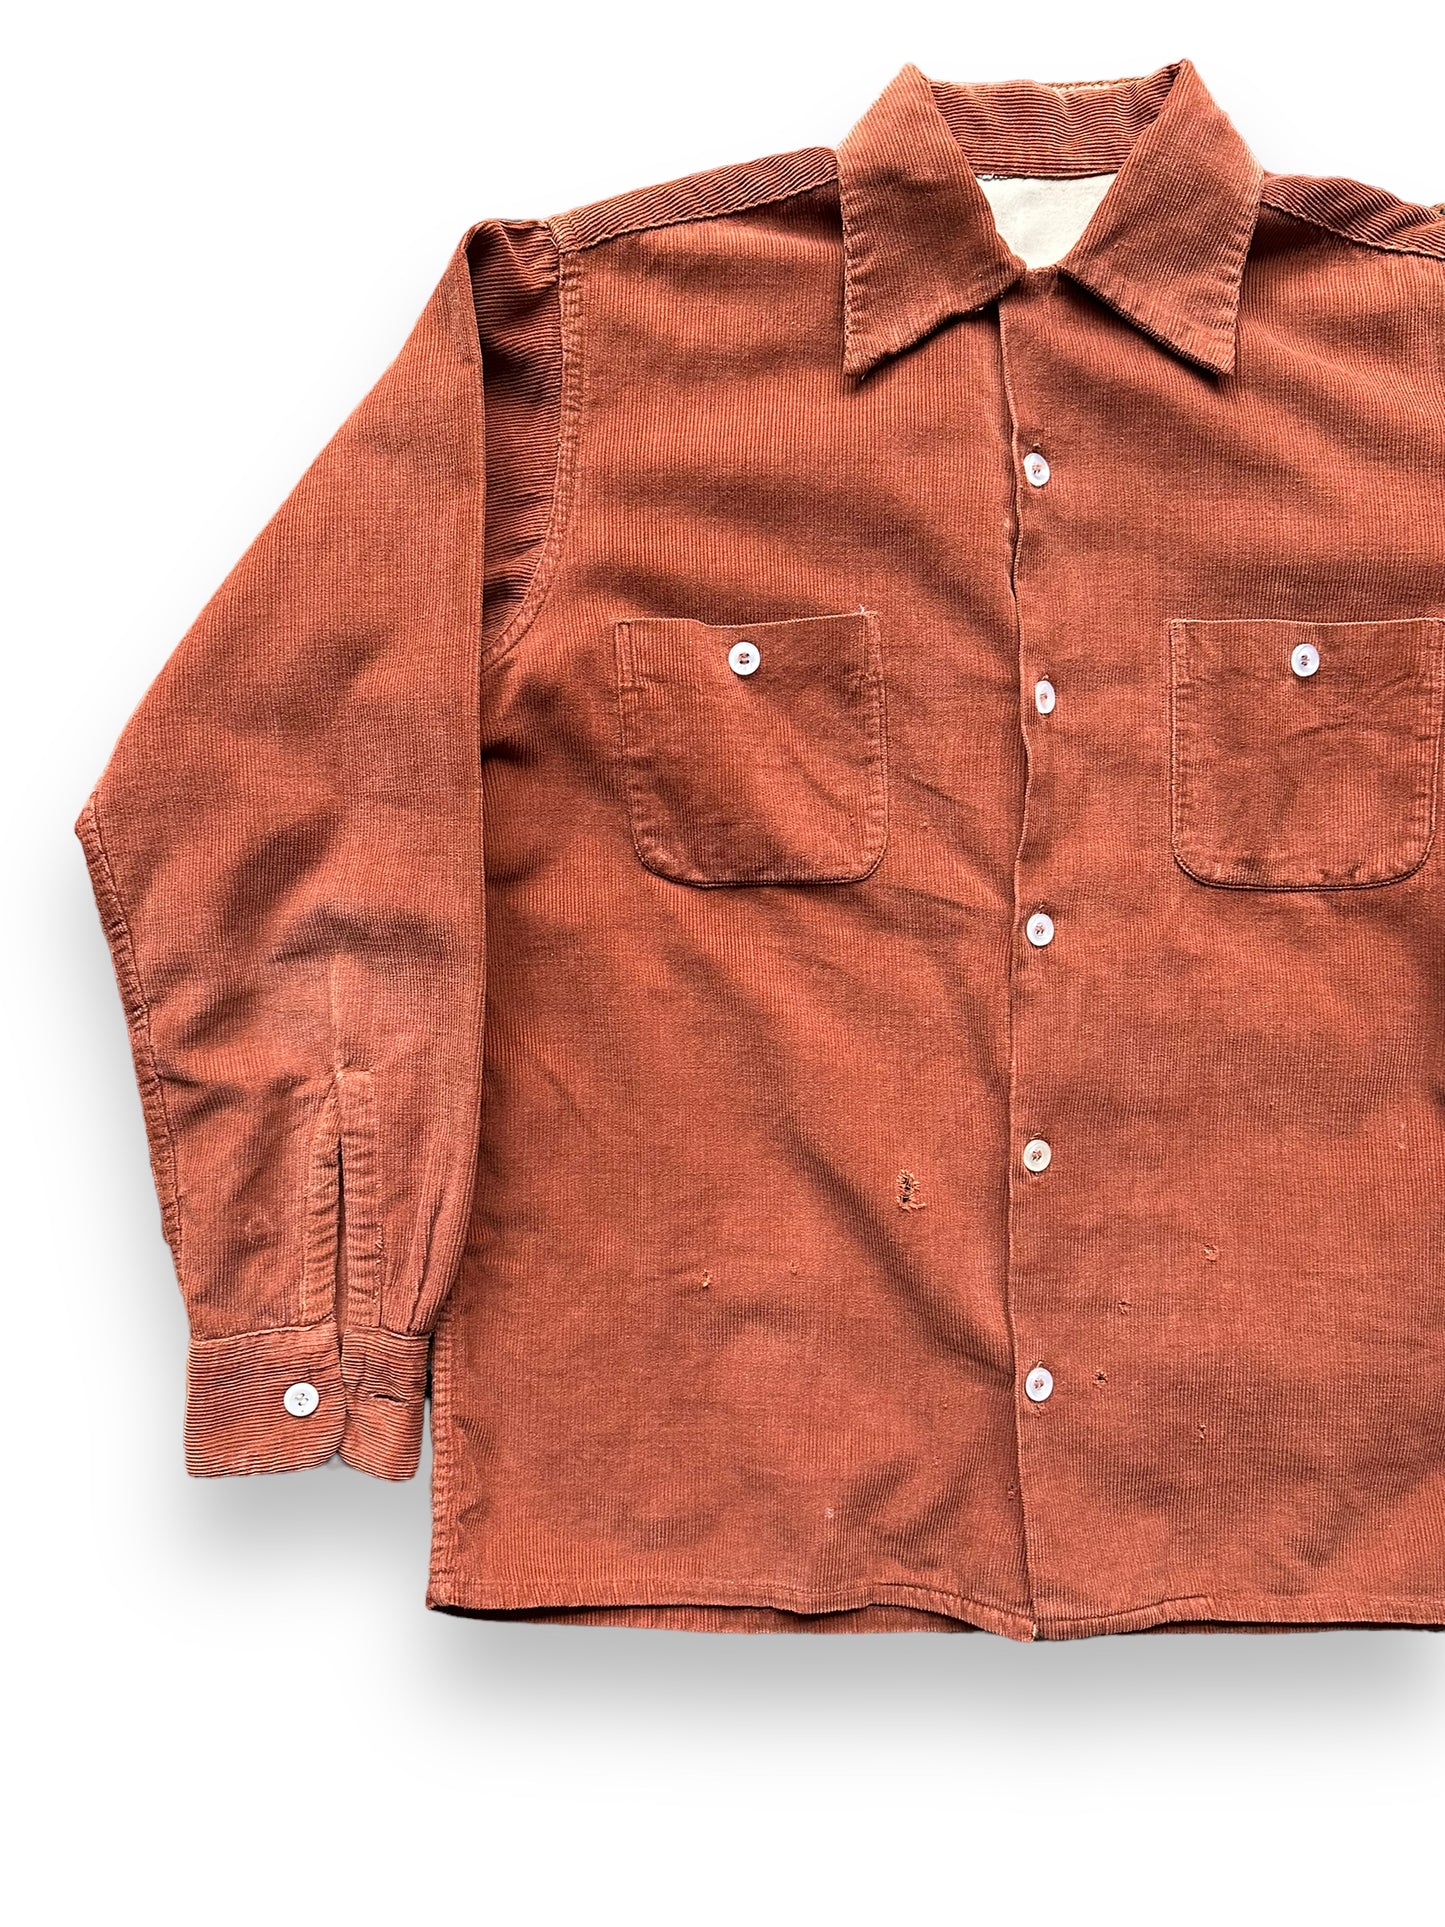 Front Right View of Vintage Rust Colored Corduroy Loop Collar Shirt  SZ M | Vintage Loop Collar Shirt Seattle | Barn Owl Vintage Seattle